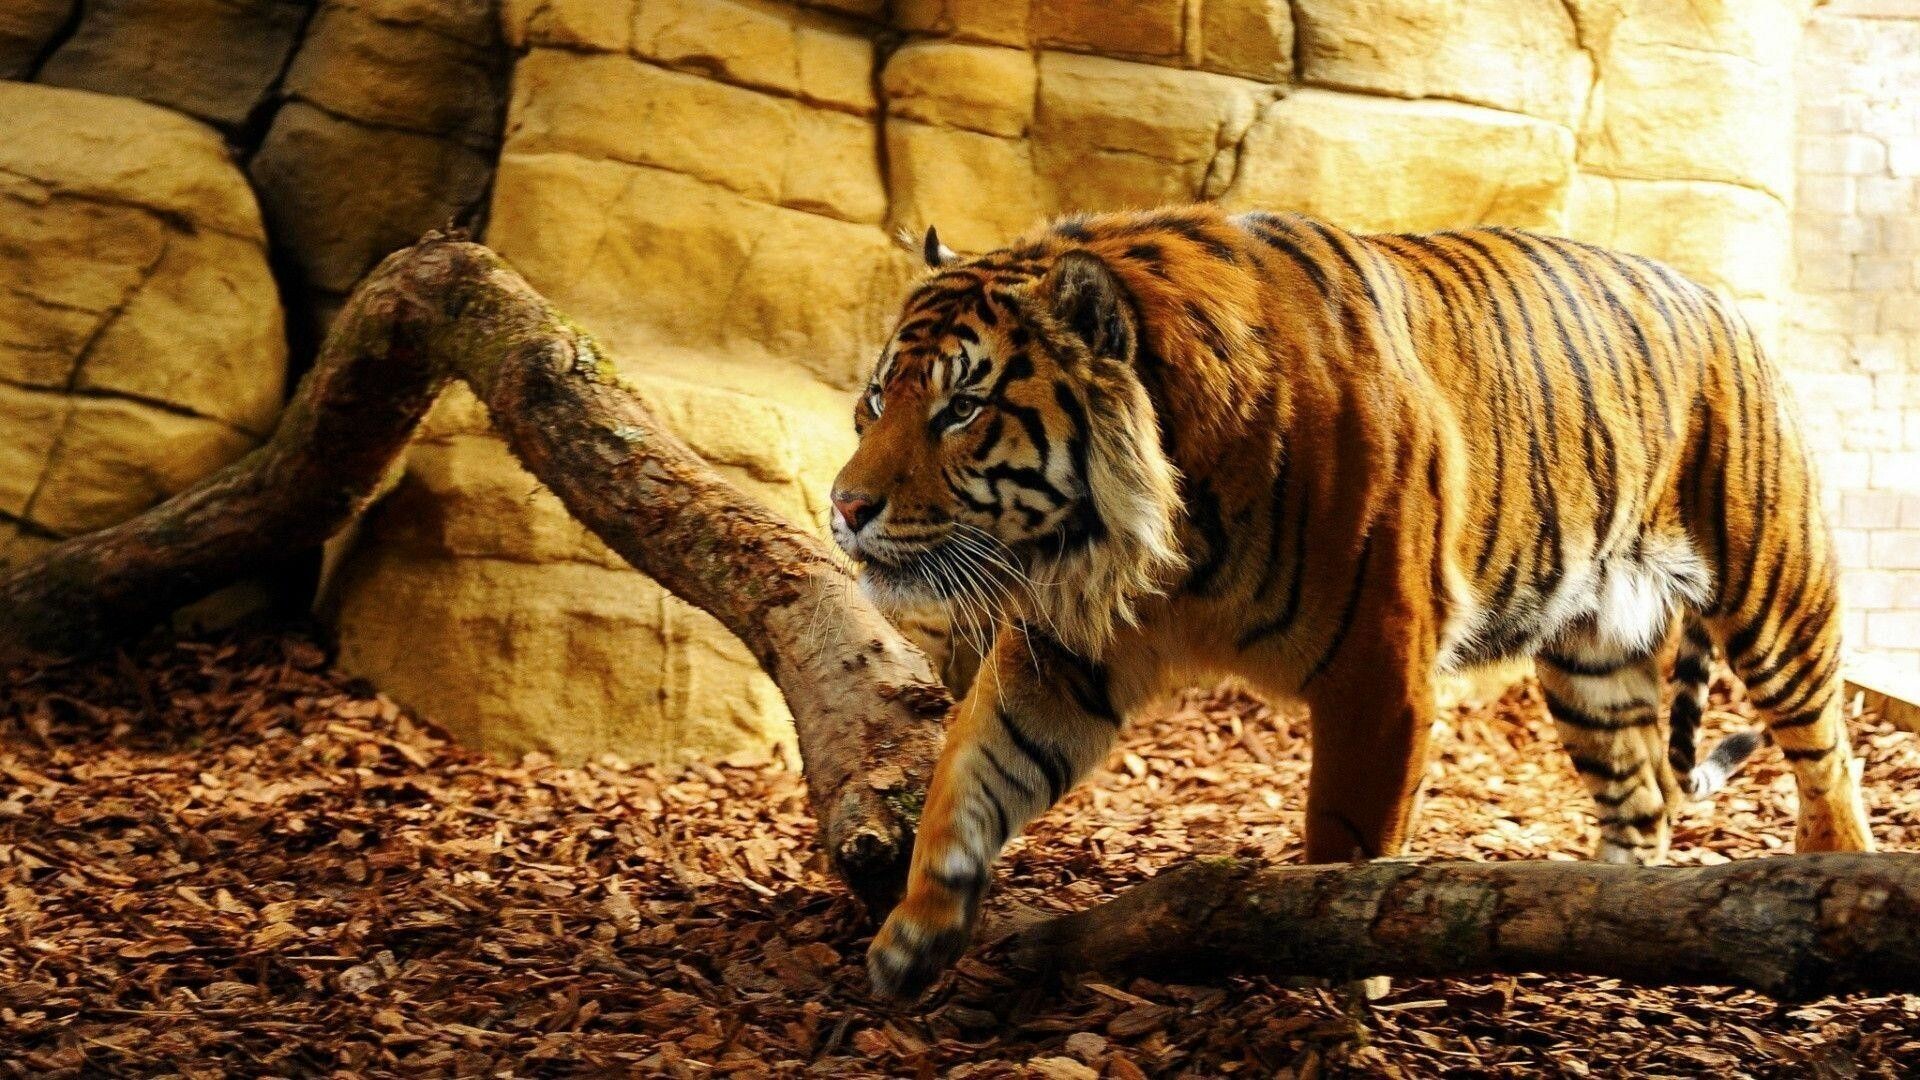 Tiger: As top predators in the food chain, tigers help keep their habitats balanced by preying on other animals, mainly herbivores. 1920x1080 Full HD Wallpaper.